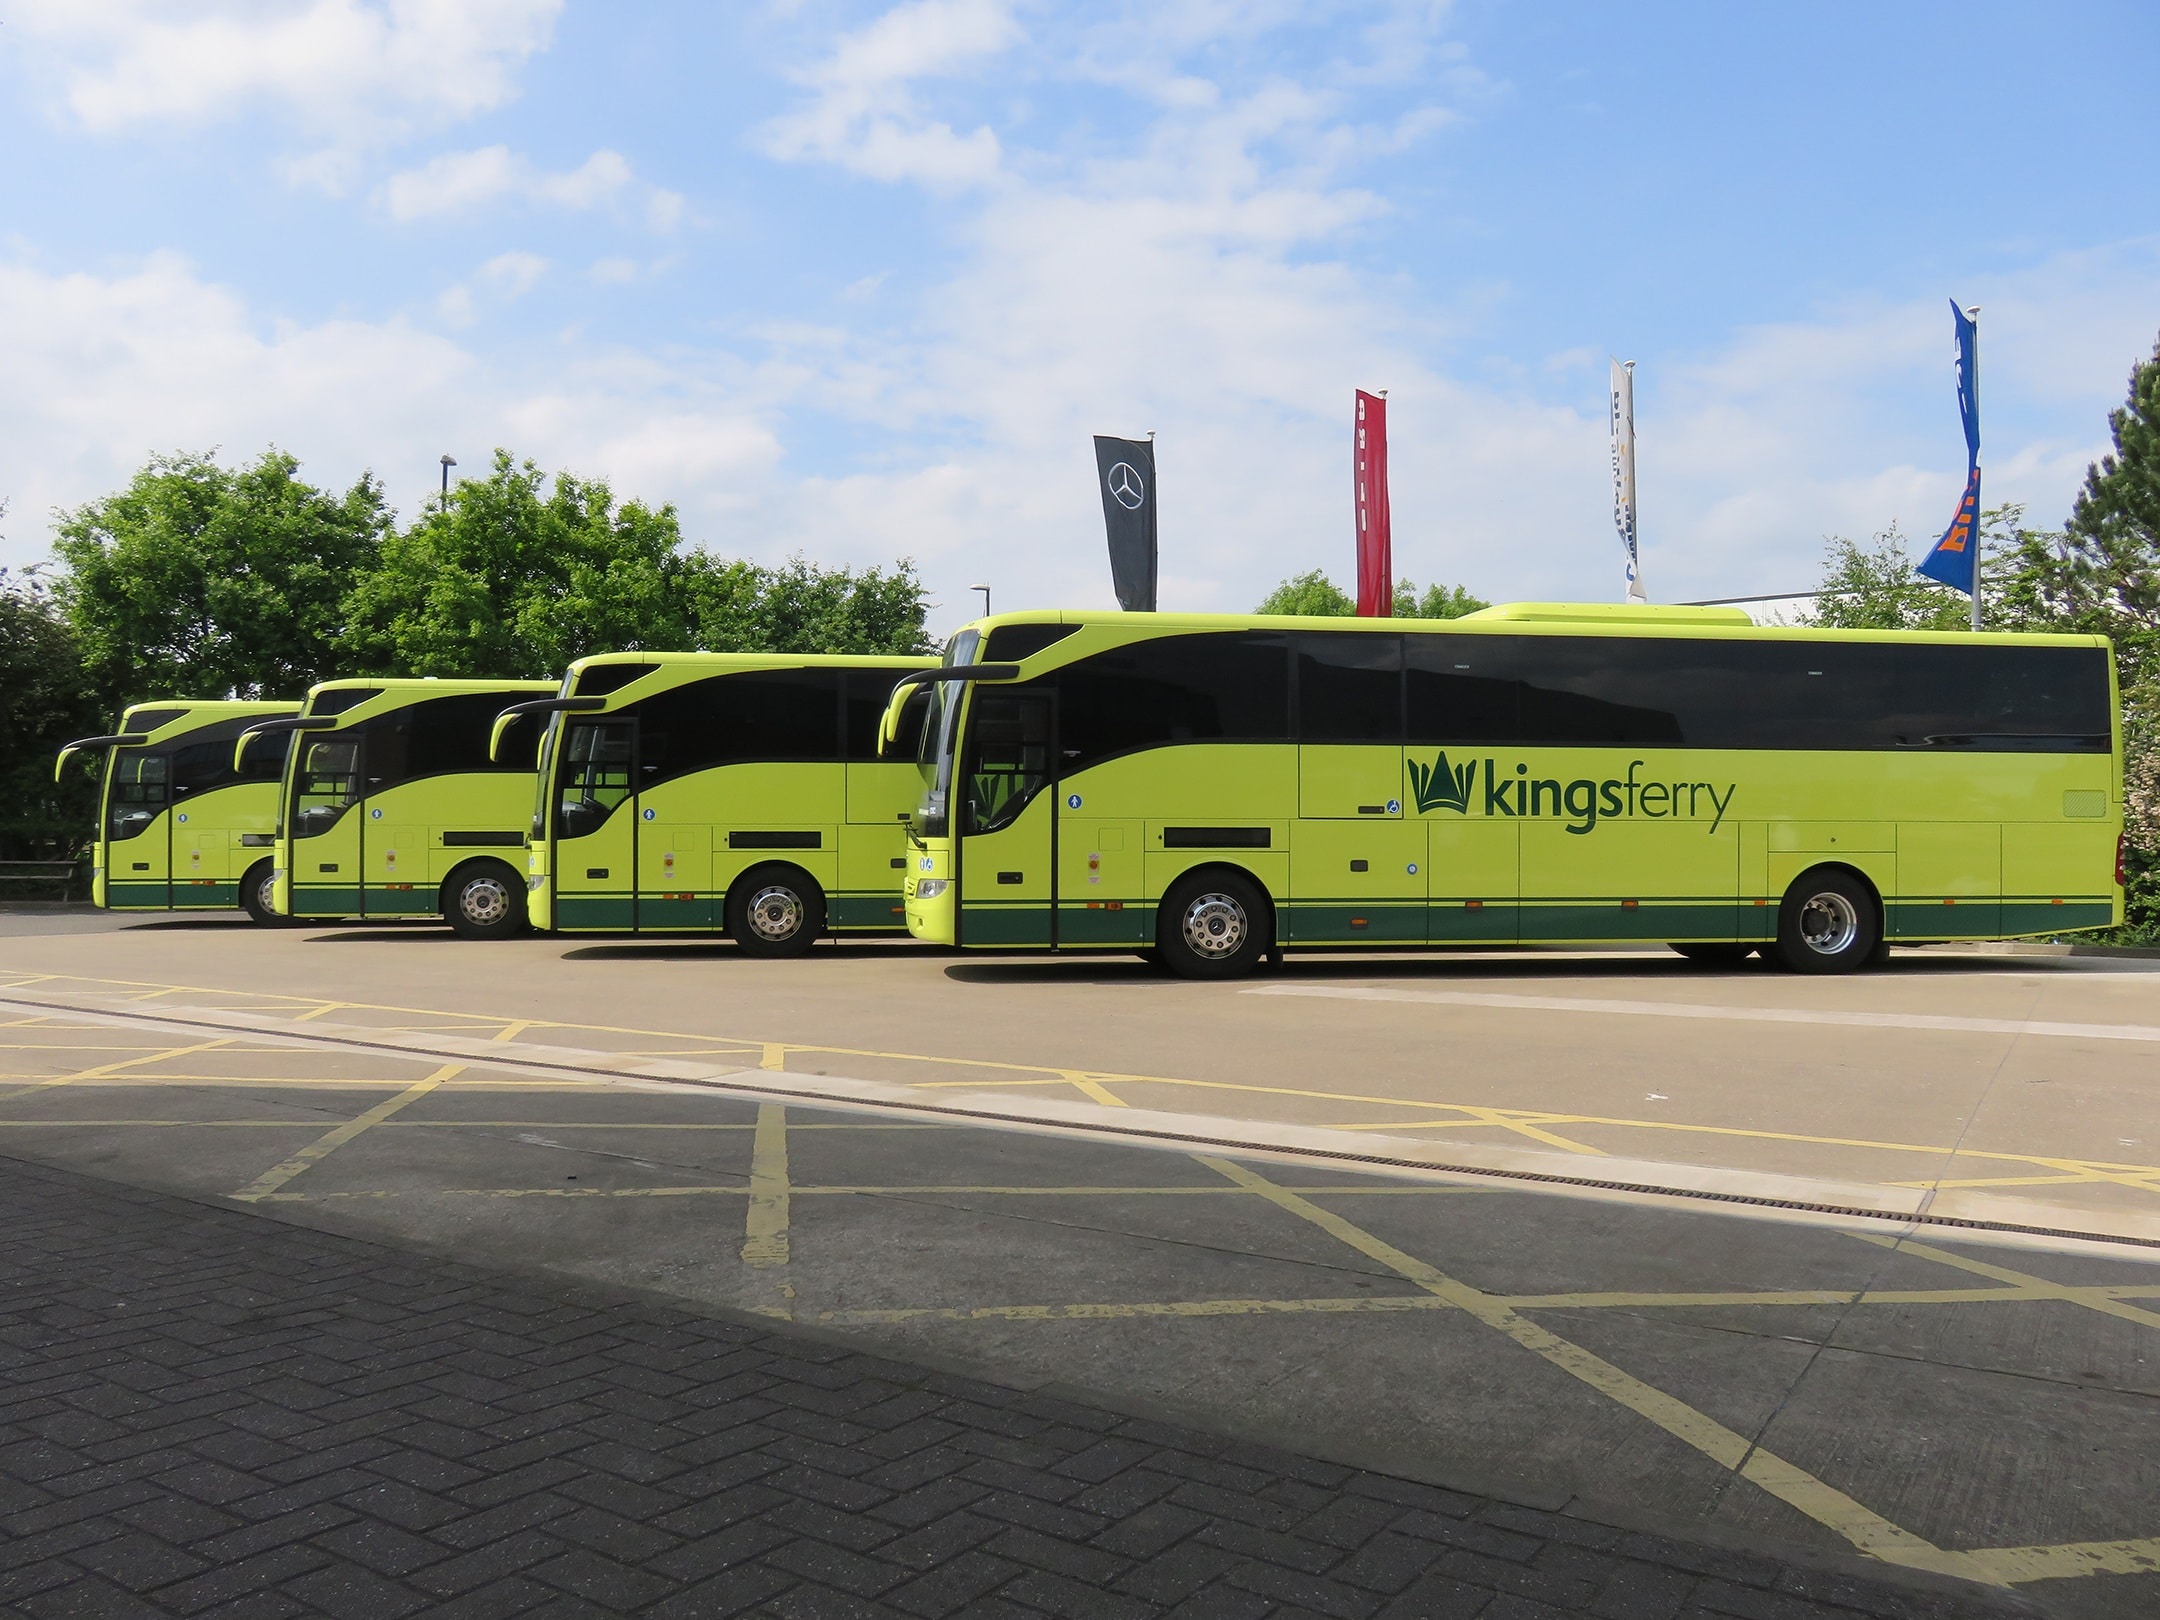 The Kings Ferry to withdraw all Kent commuter services